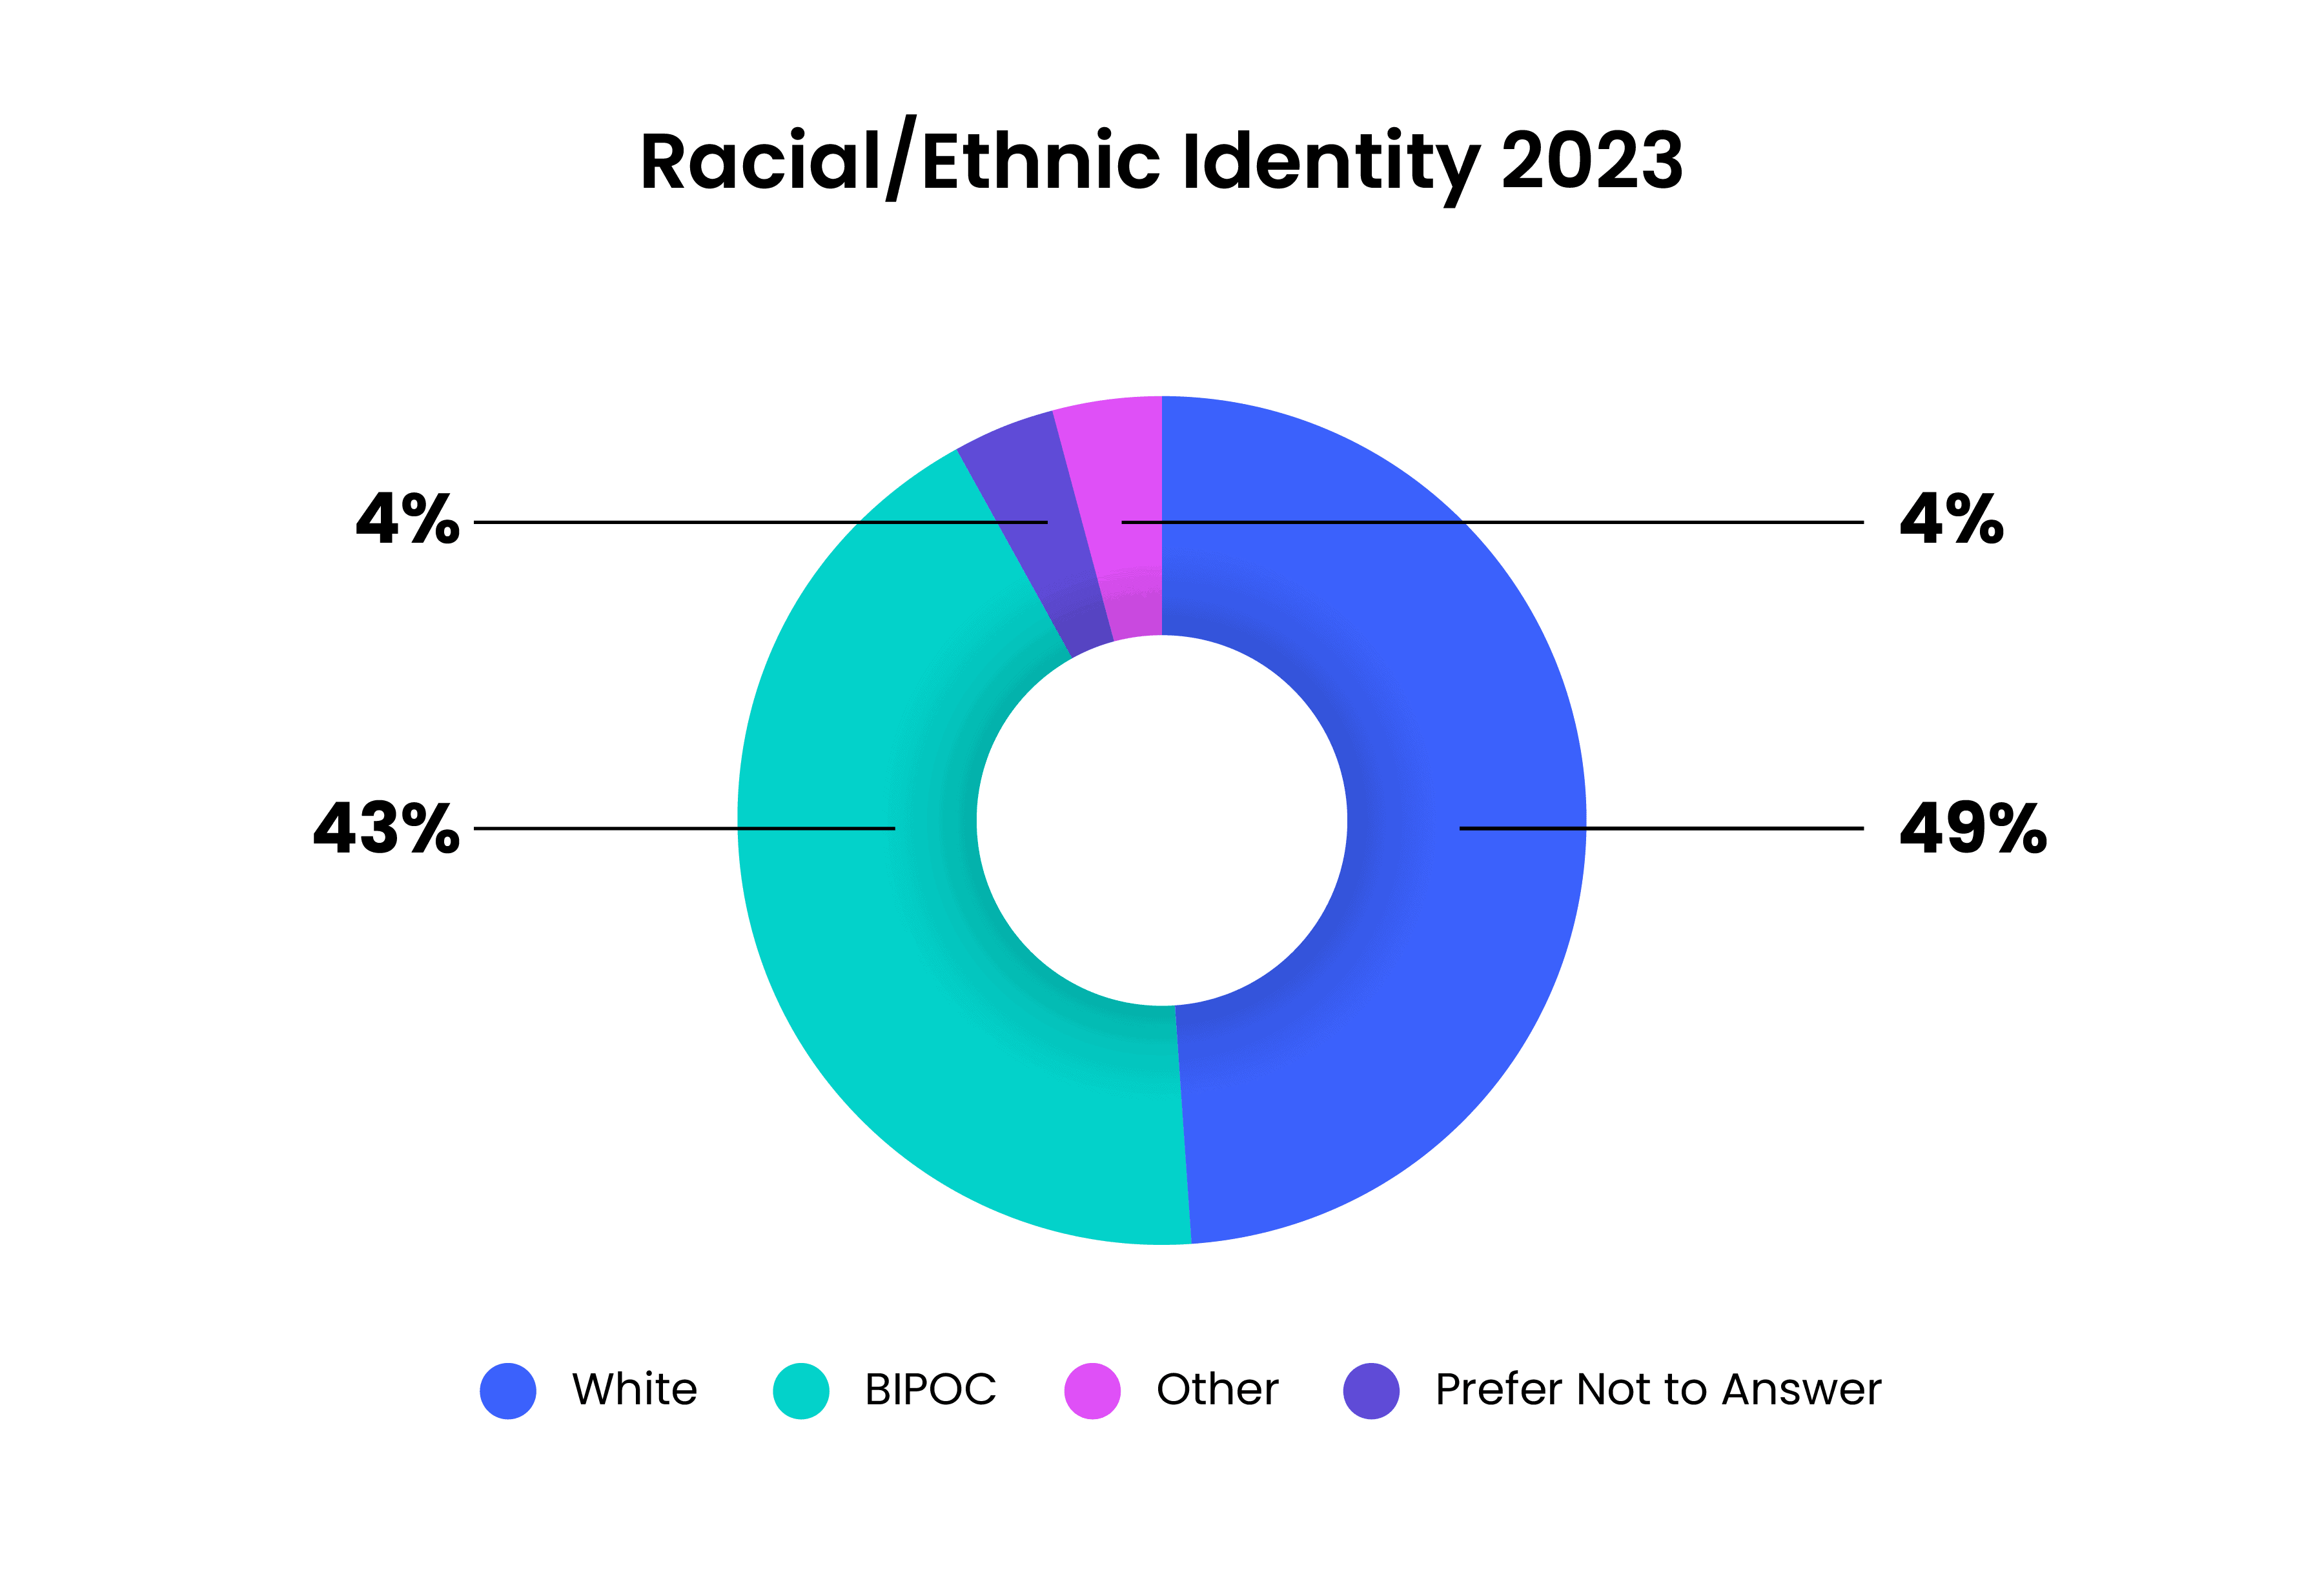 Racial/Ethnic Identity 2023: 43% BIPOC, 49% White, 4% Prefer Not to Answer, 4% Other